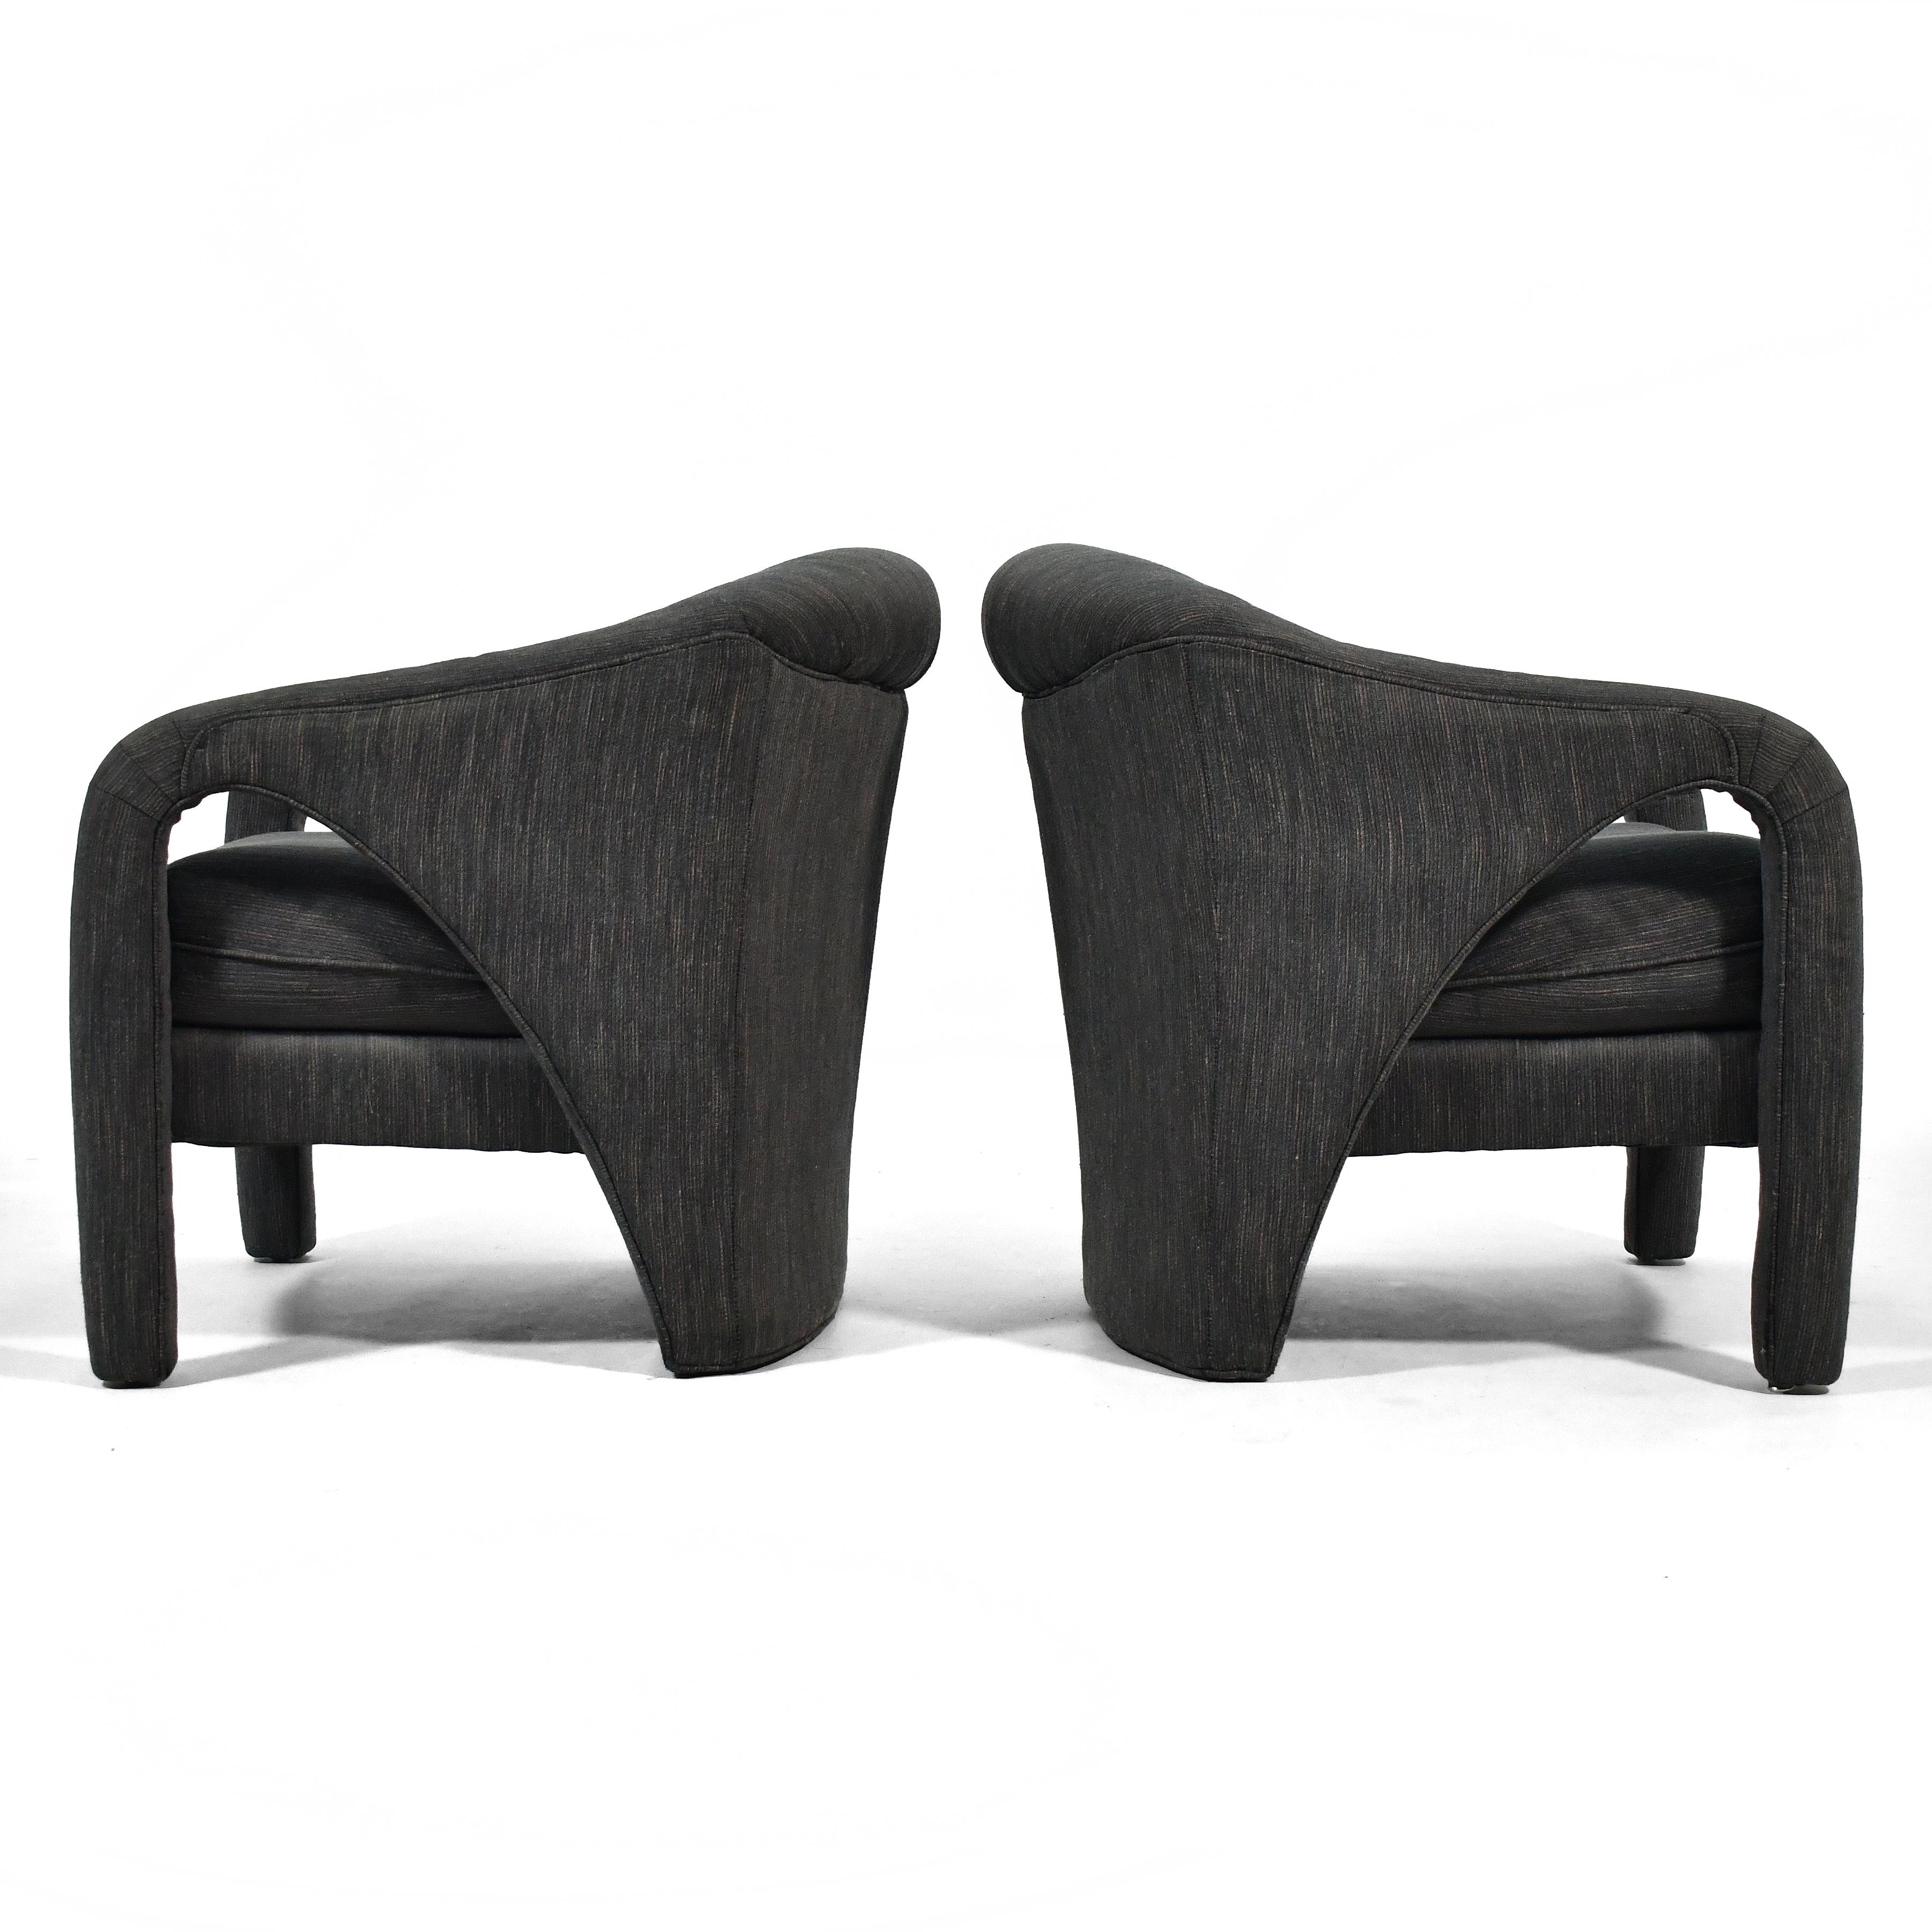 Pair of Elephant Chairs by Weiman In Good Condition For Sale In Highland, IN